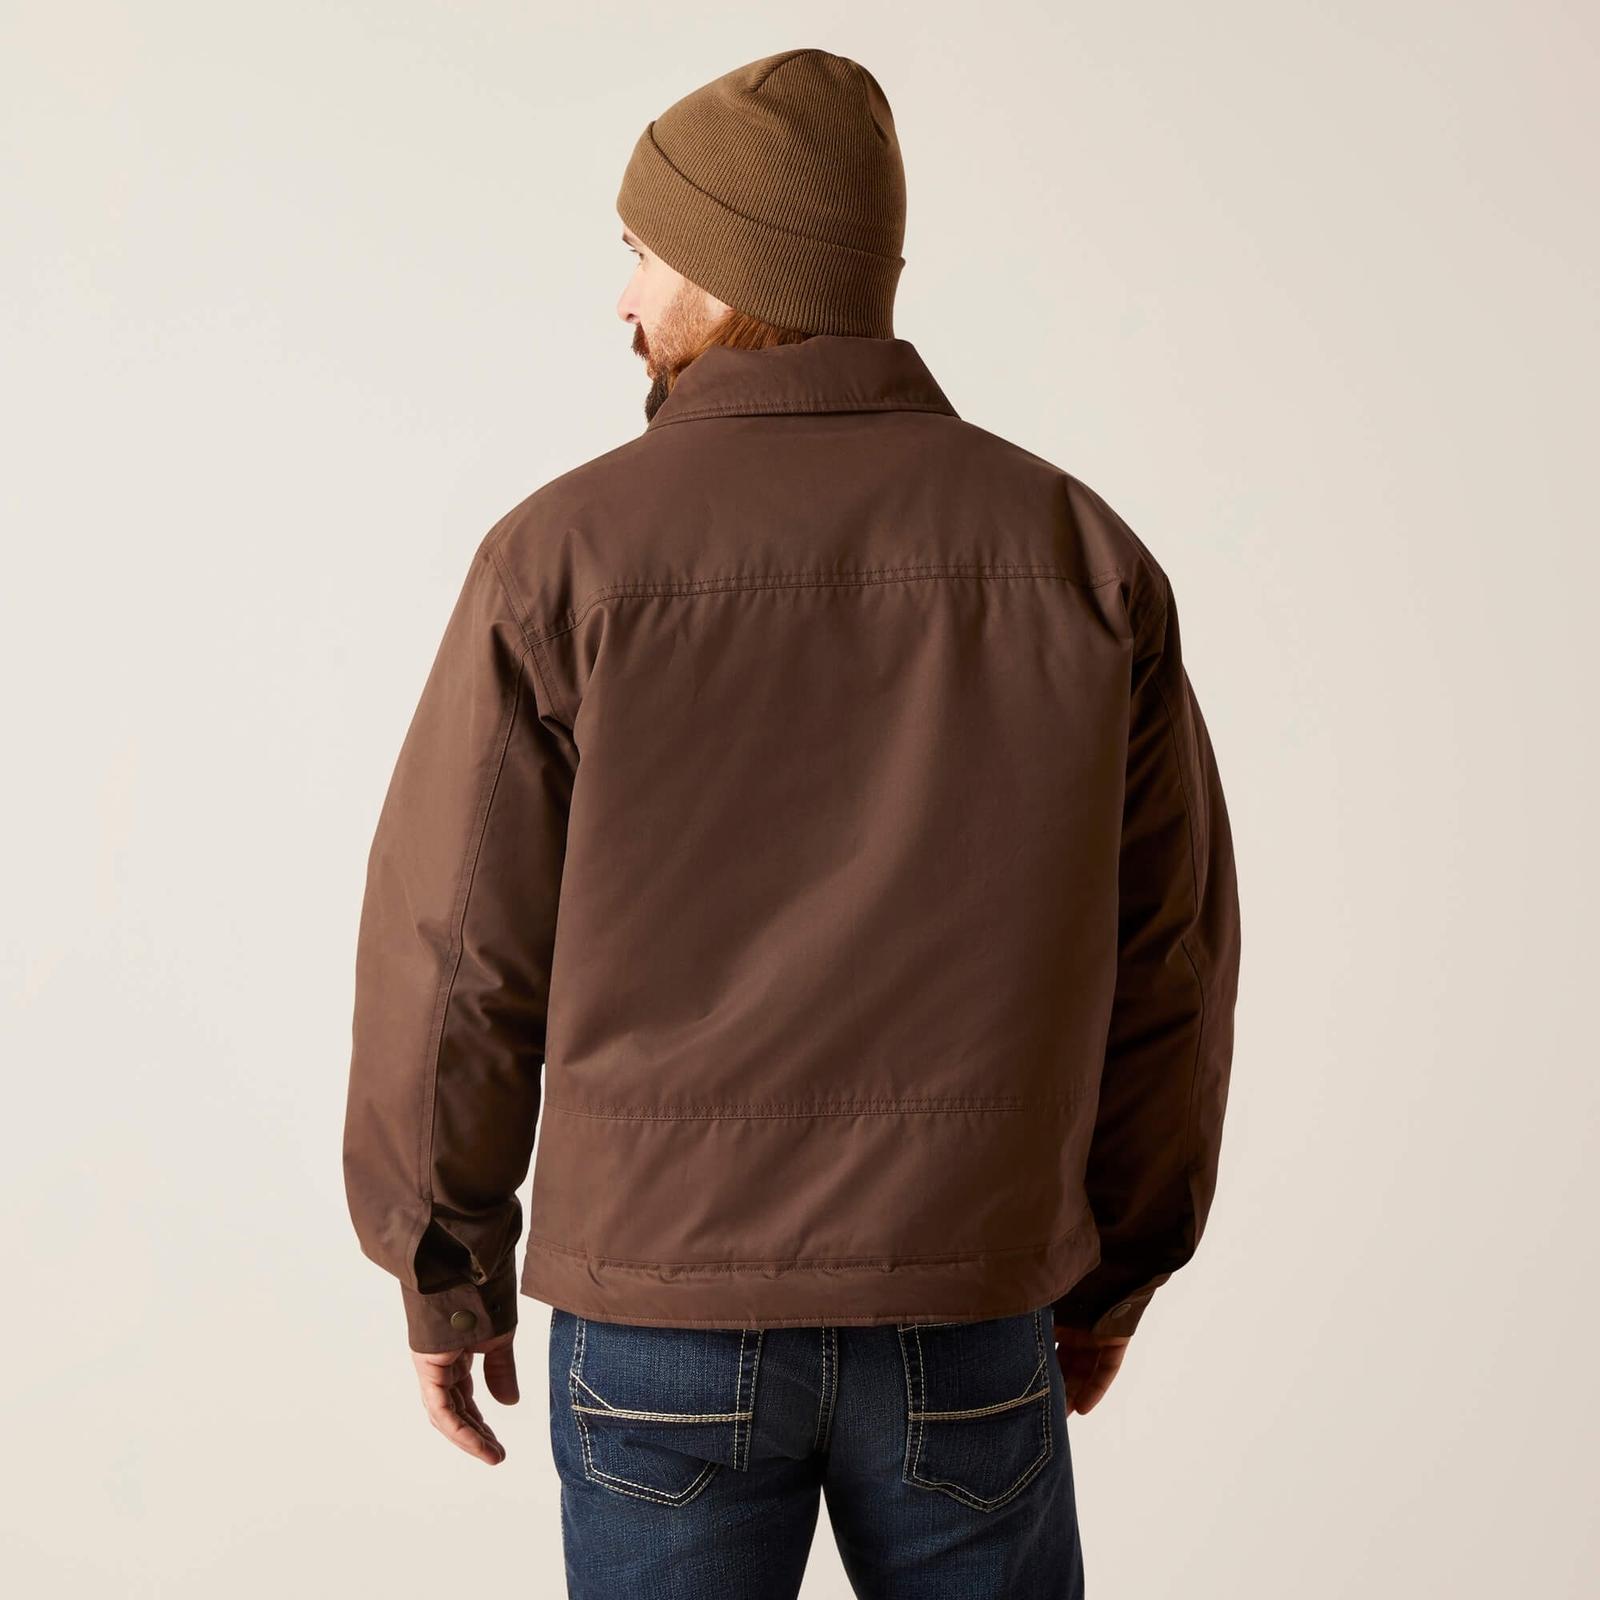 Ariat Men's Grizzly 2.0 Canvas Conceal and Carry Jacket